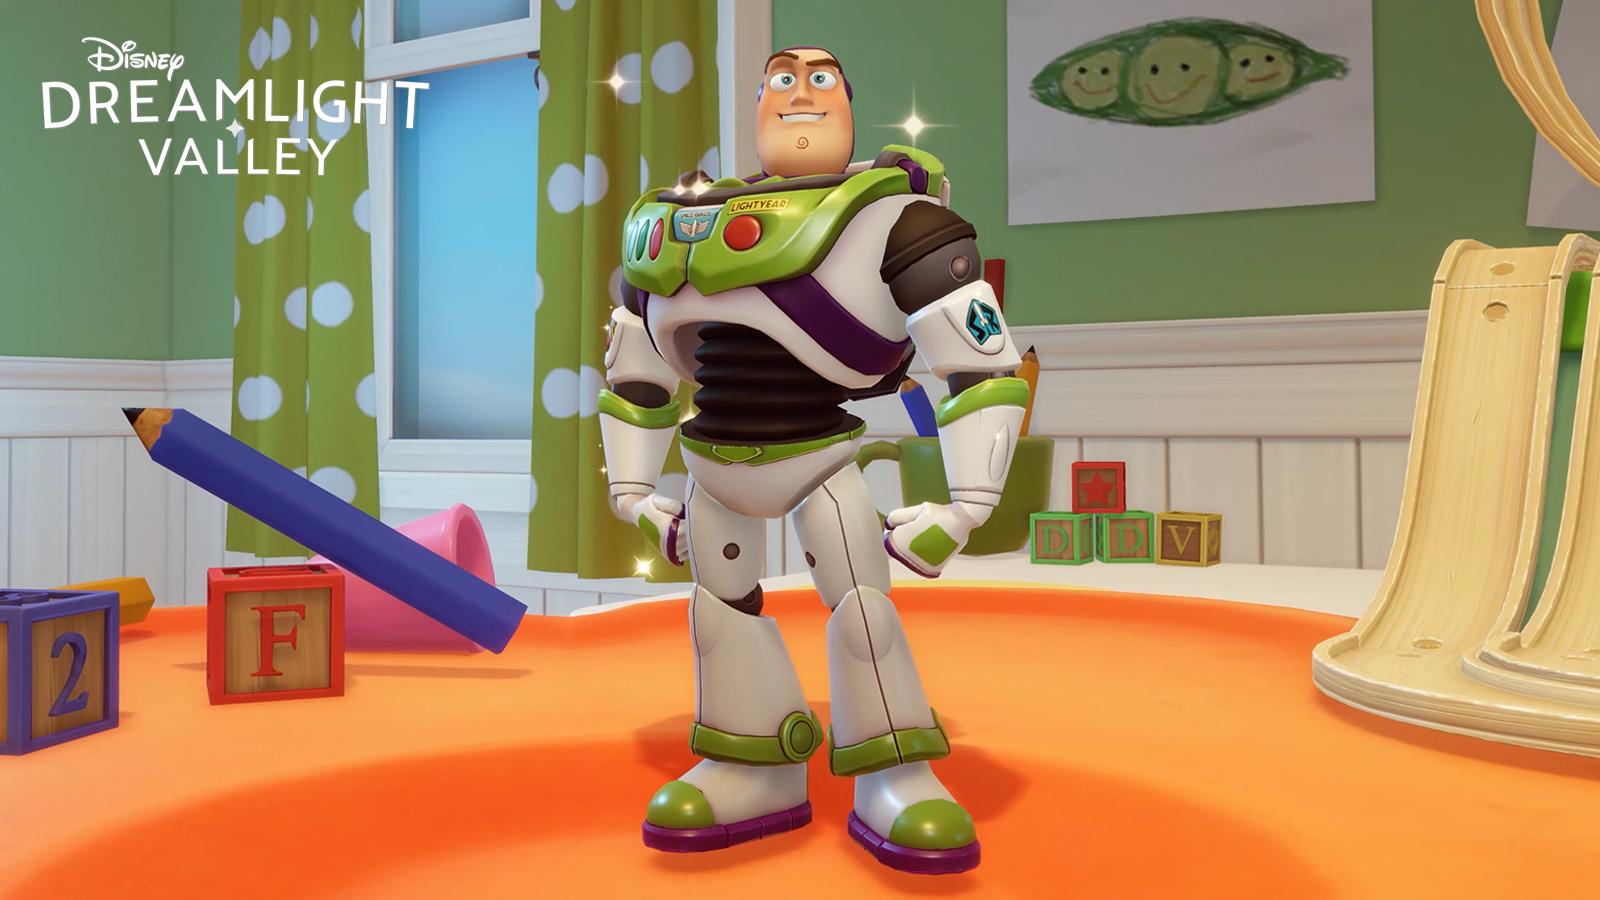 Buzz Lightyear is one of the characters in Disney Dreamlight Valley